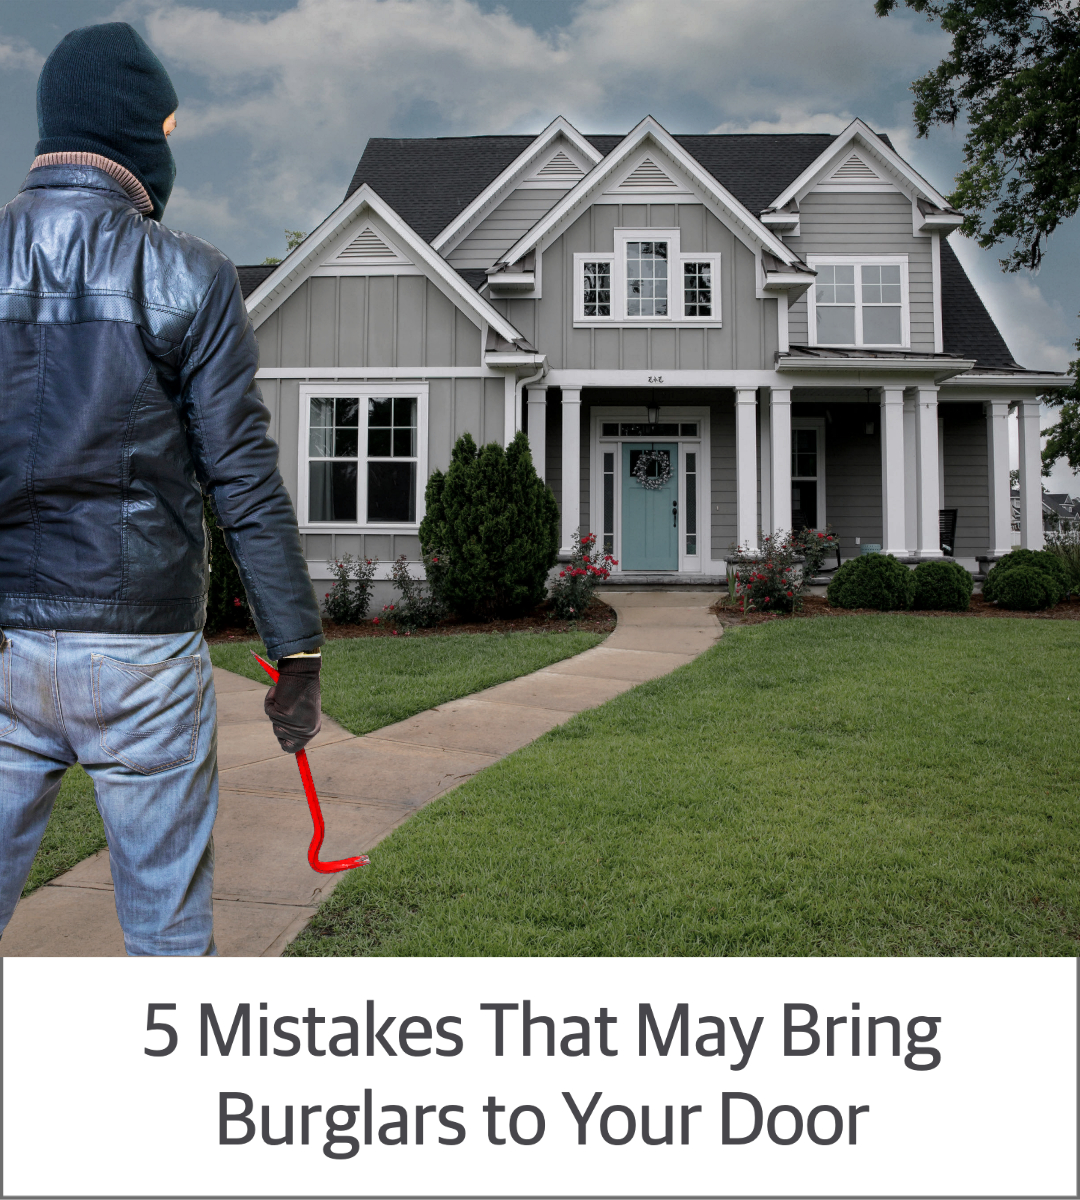 blog containing tips on how to reduce your chances of becoming a burglars target